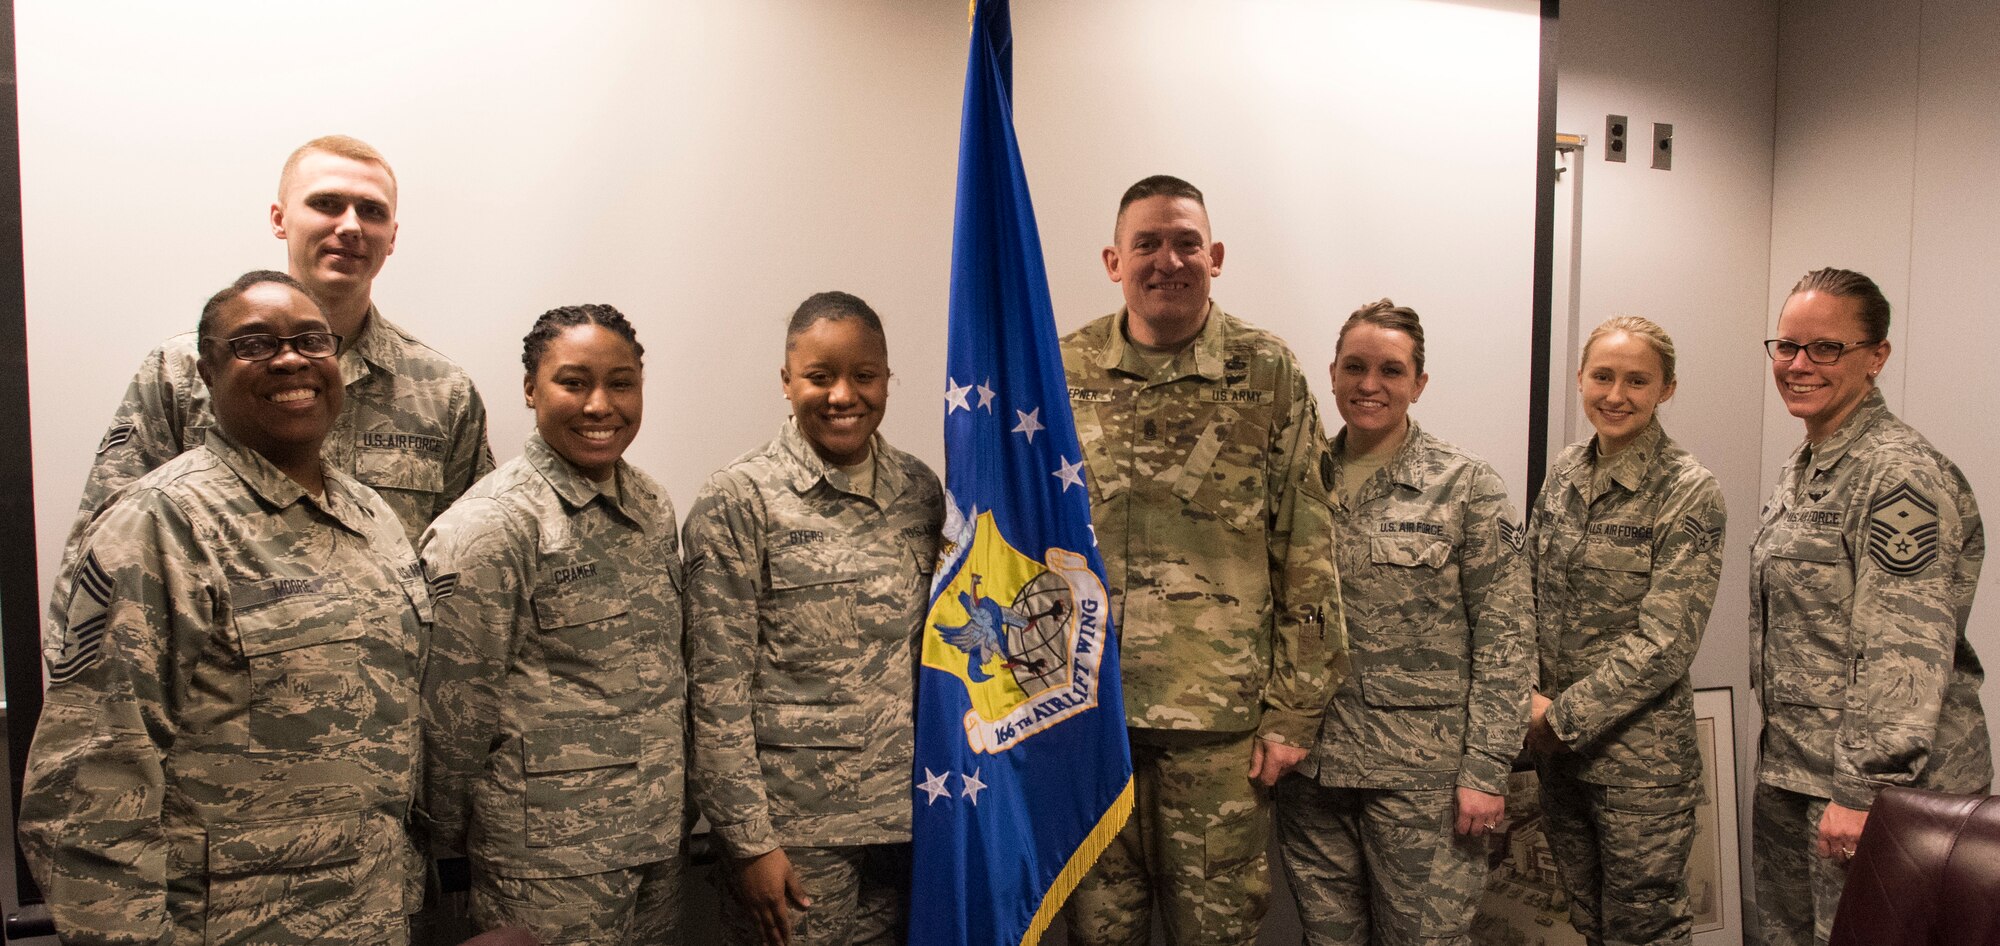 Command Sergeant Major Christopher Kepner, Senior Enlisted Advisor to the Chief, National Guard Bureau, meets with Airmen of the 166th Airlift Wing, March 1, 2019, at the New Castle Air National Guard Base, Del. During his visit, Kepner toured the base, its facilities and connected with Airmen. (U.S. Air National Guard Photo by Mr. Mitch Topal)